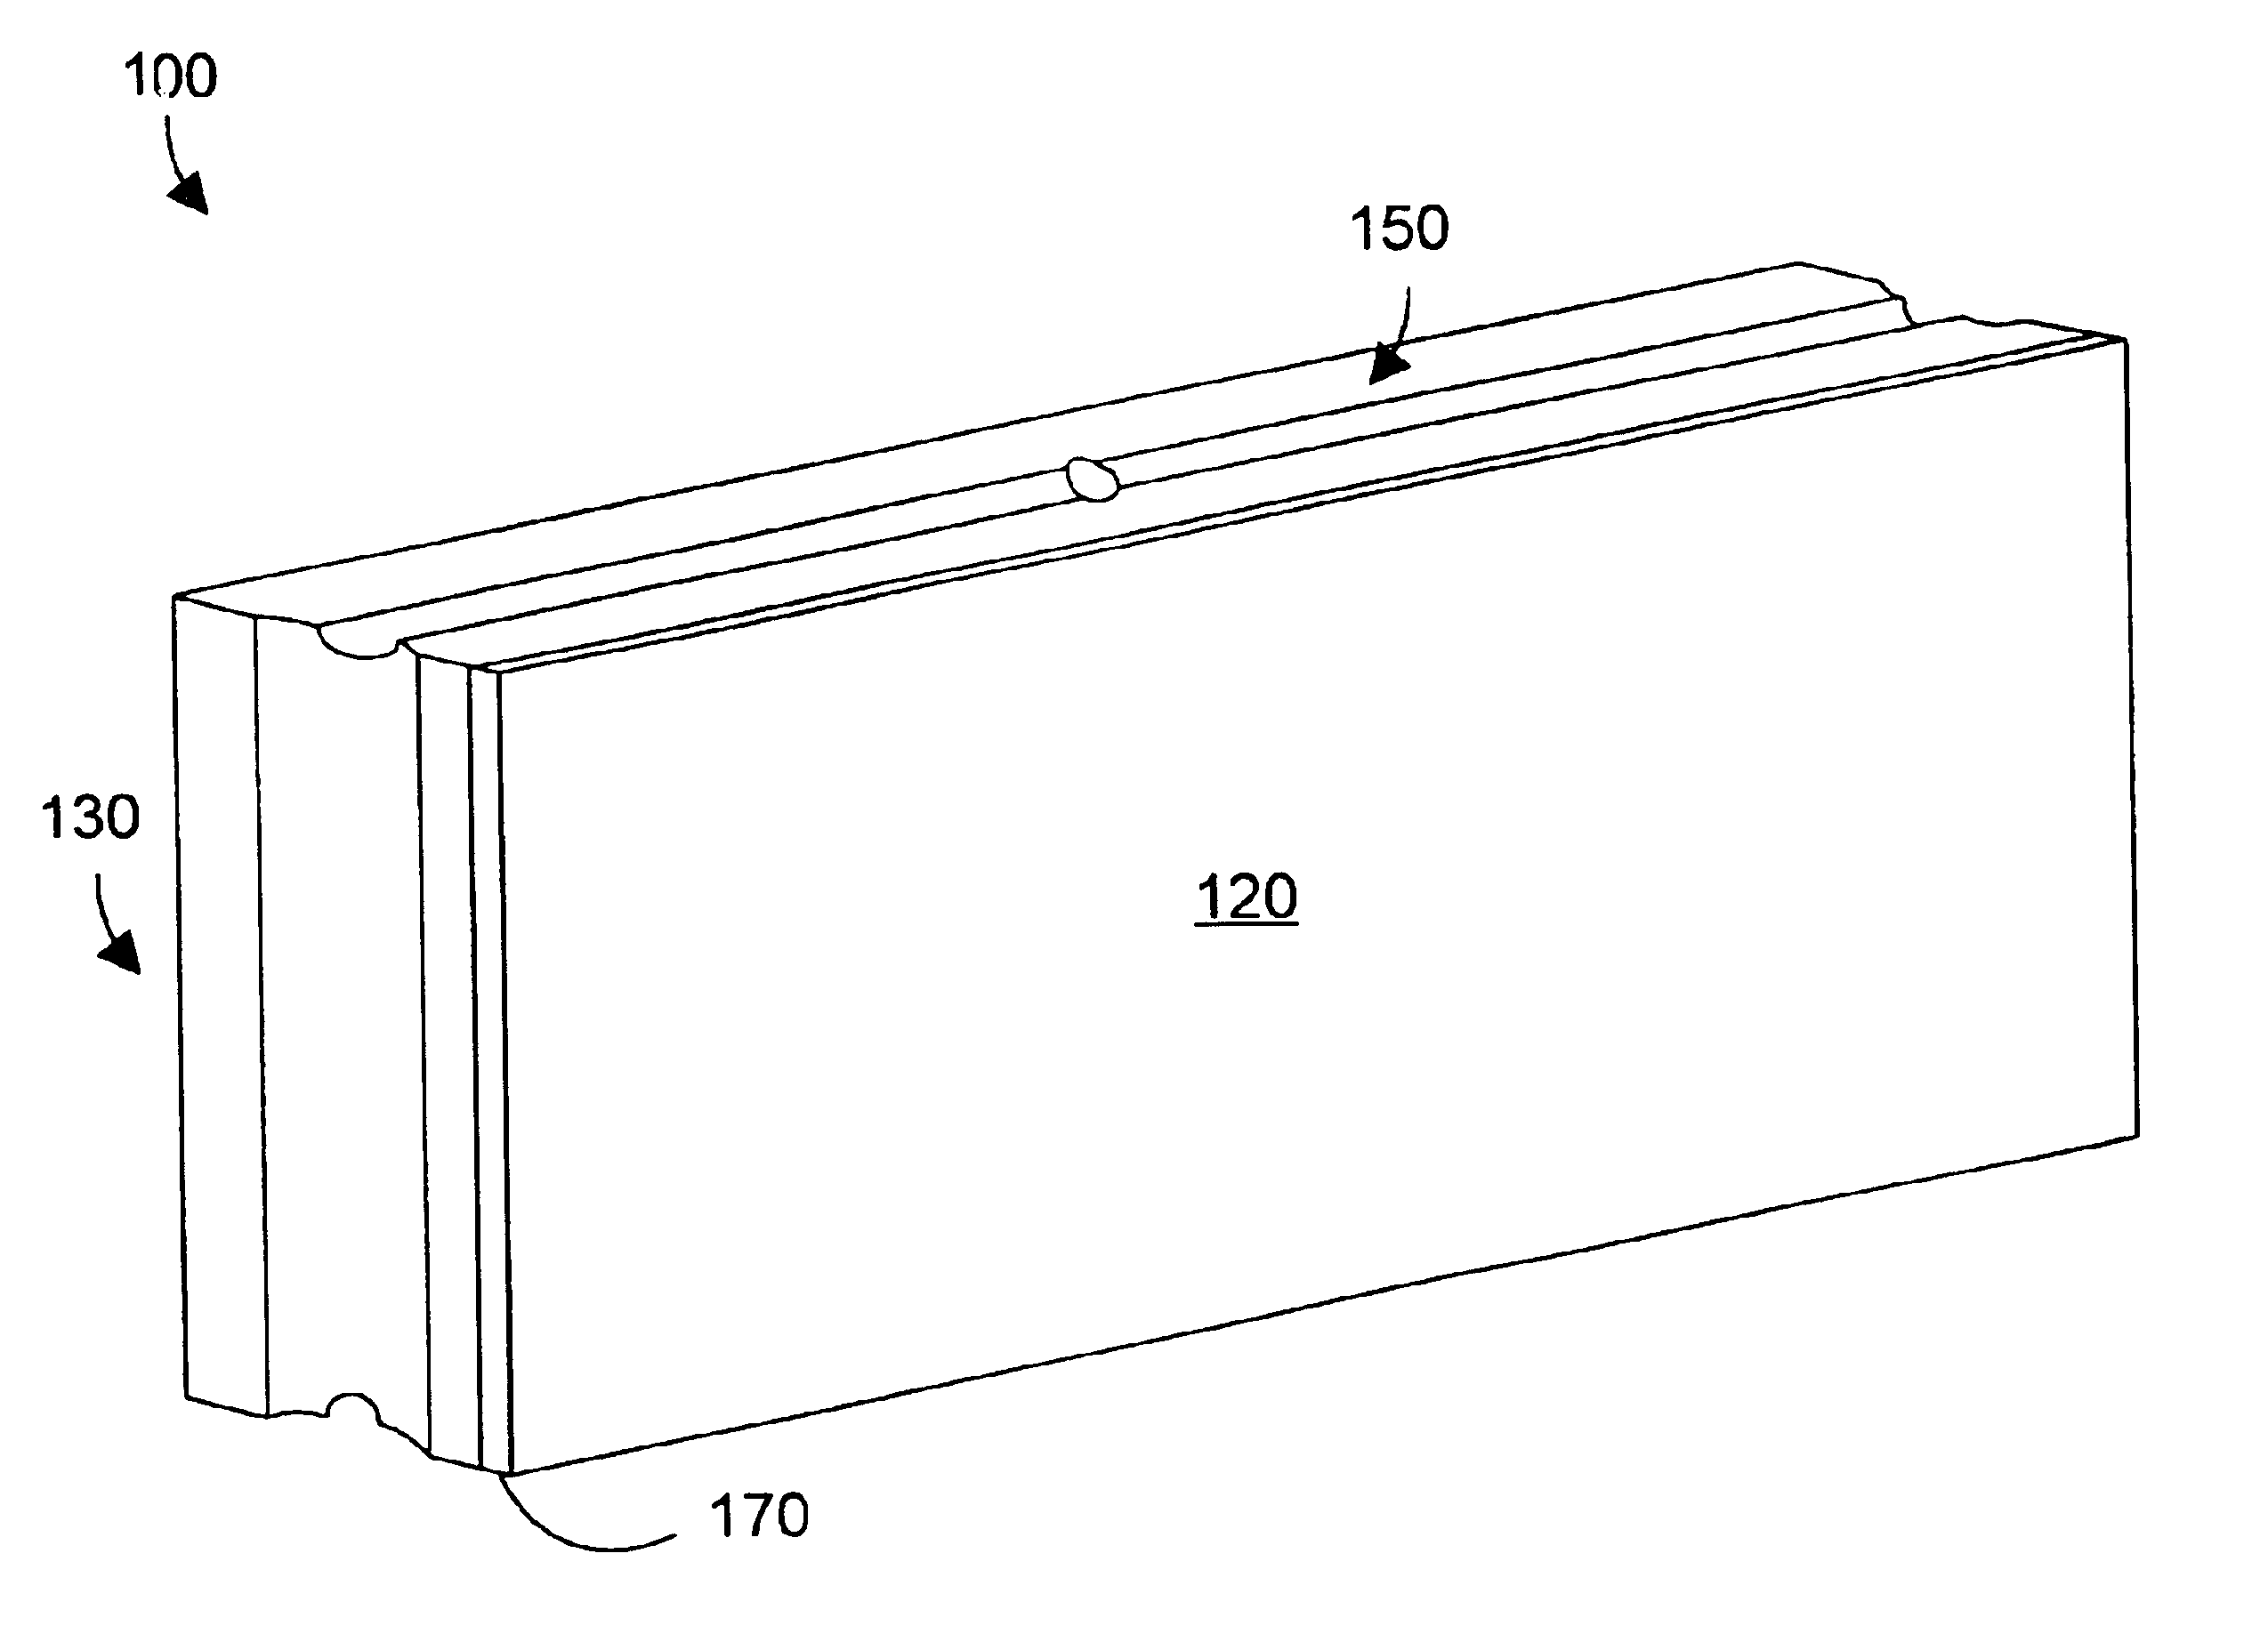 Building block with a cement-based attachment layer